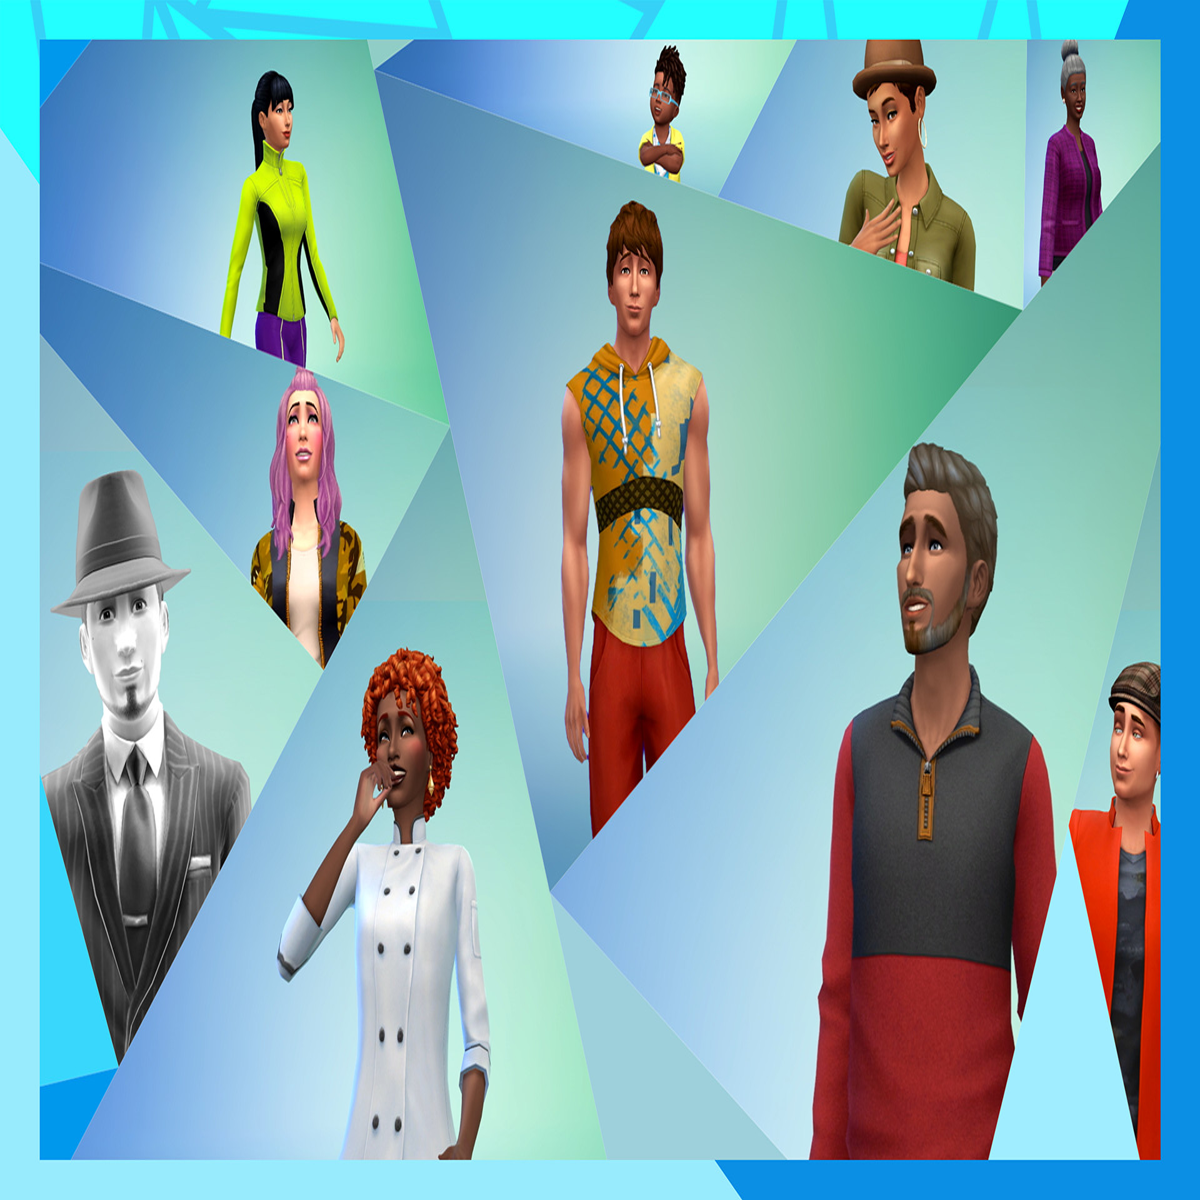 You Can Download The Sims 4 For Free On Mac, PC Right Now, Here's How